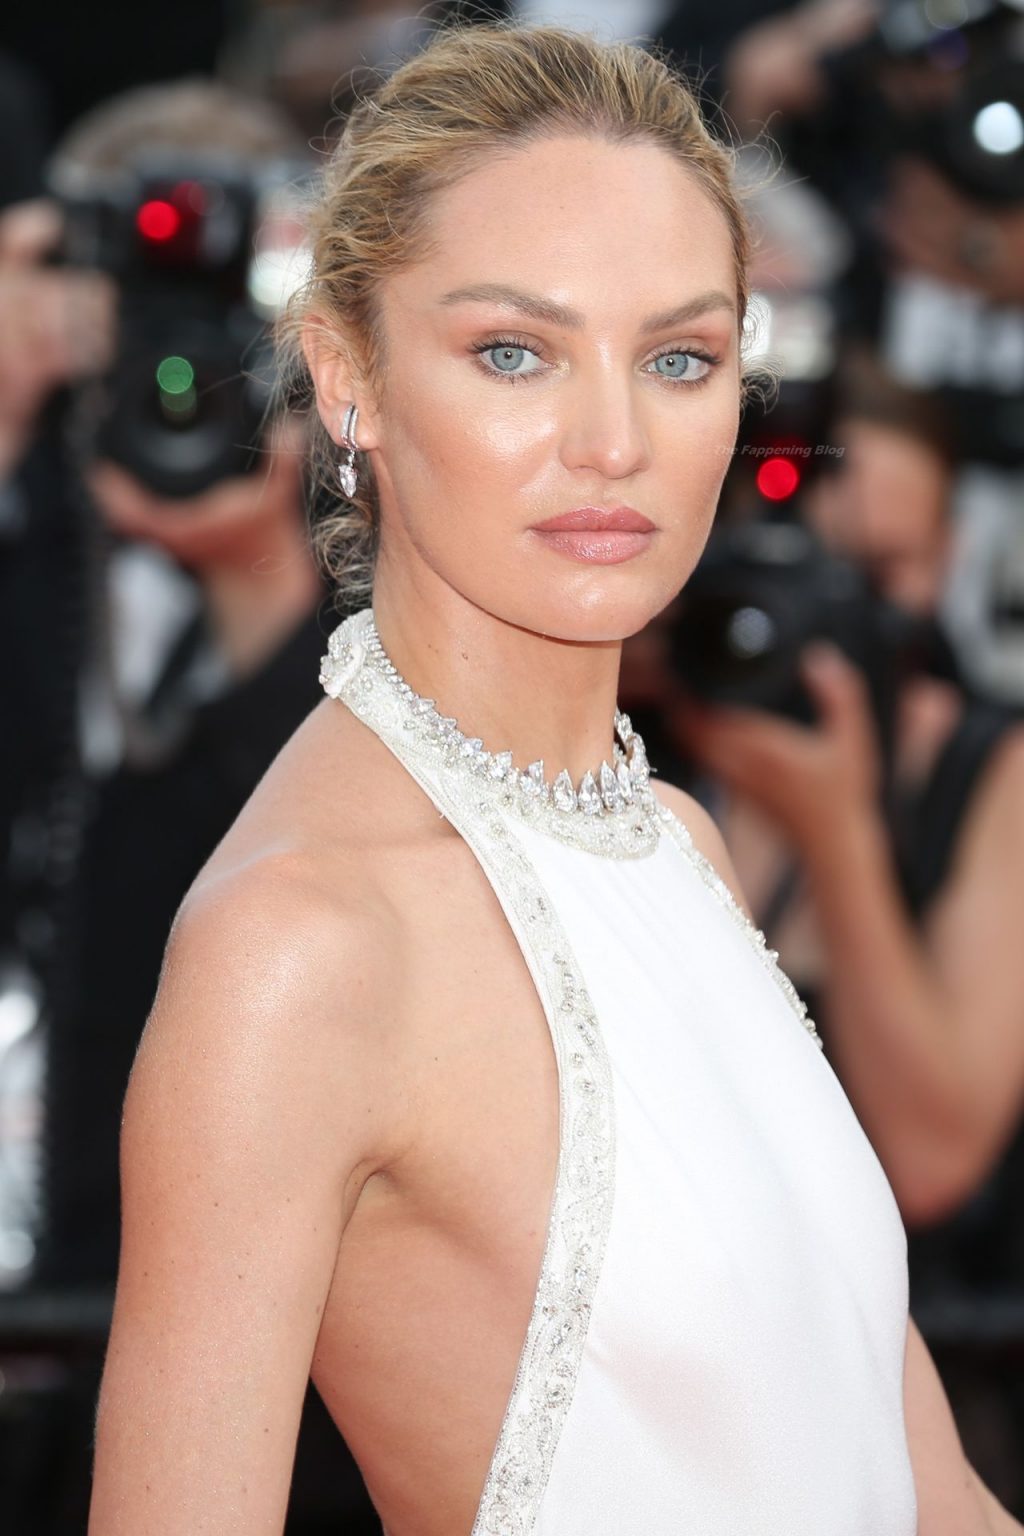 Braless Candice Swanepoel Stuns on the Red Carpet at the 74th annual Cannes Film Festival (108 Photos)